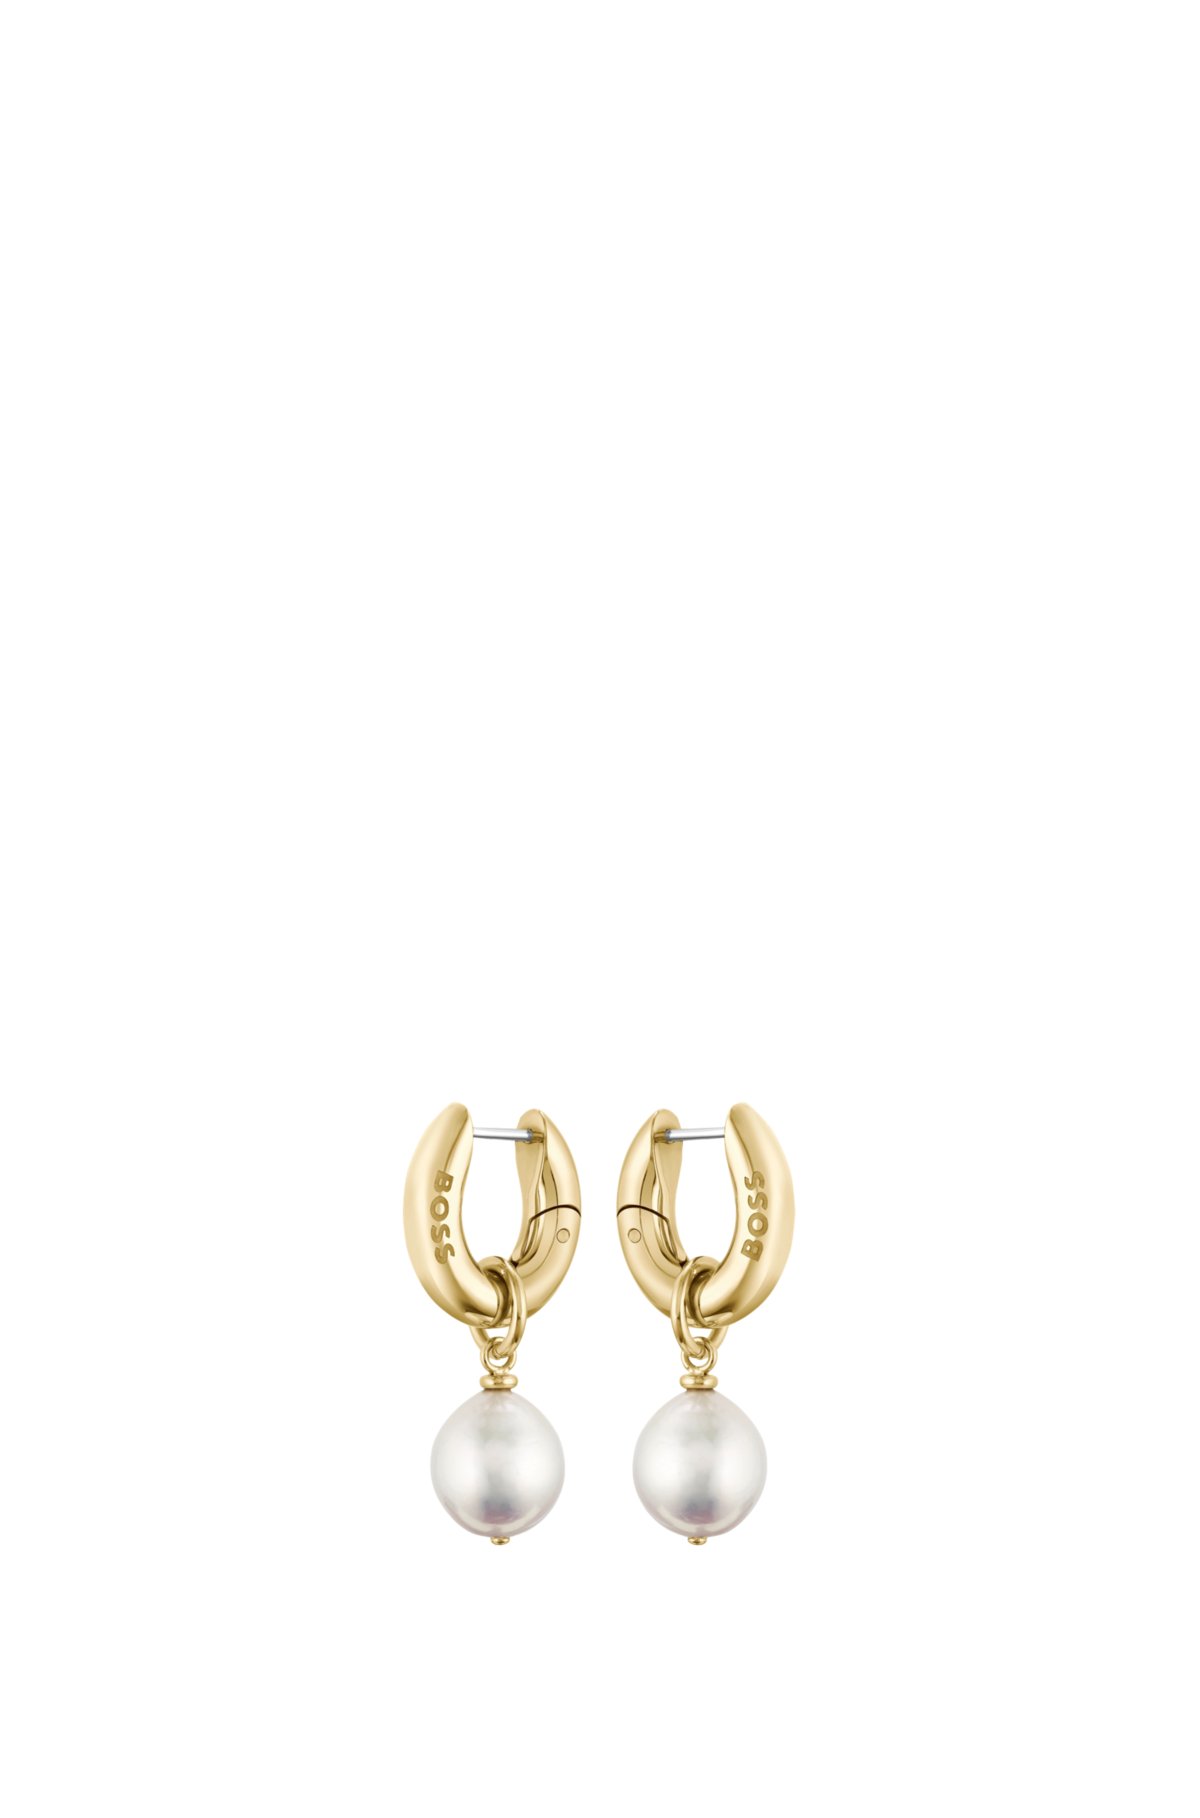 Gold-tone branded earrings with removable pearls, Gold